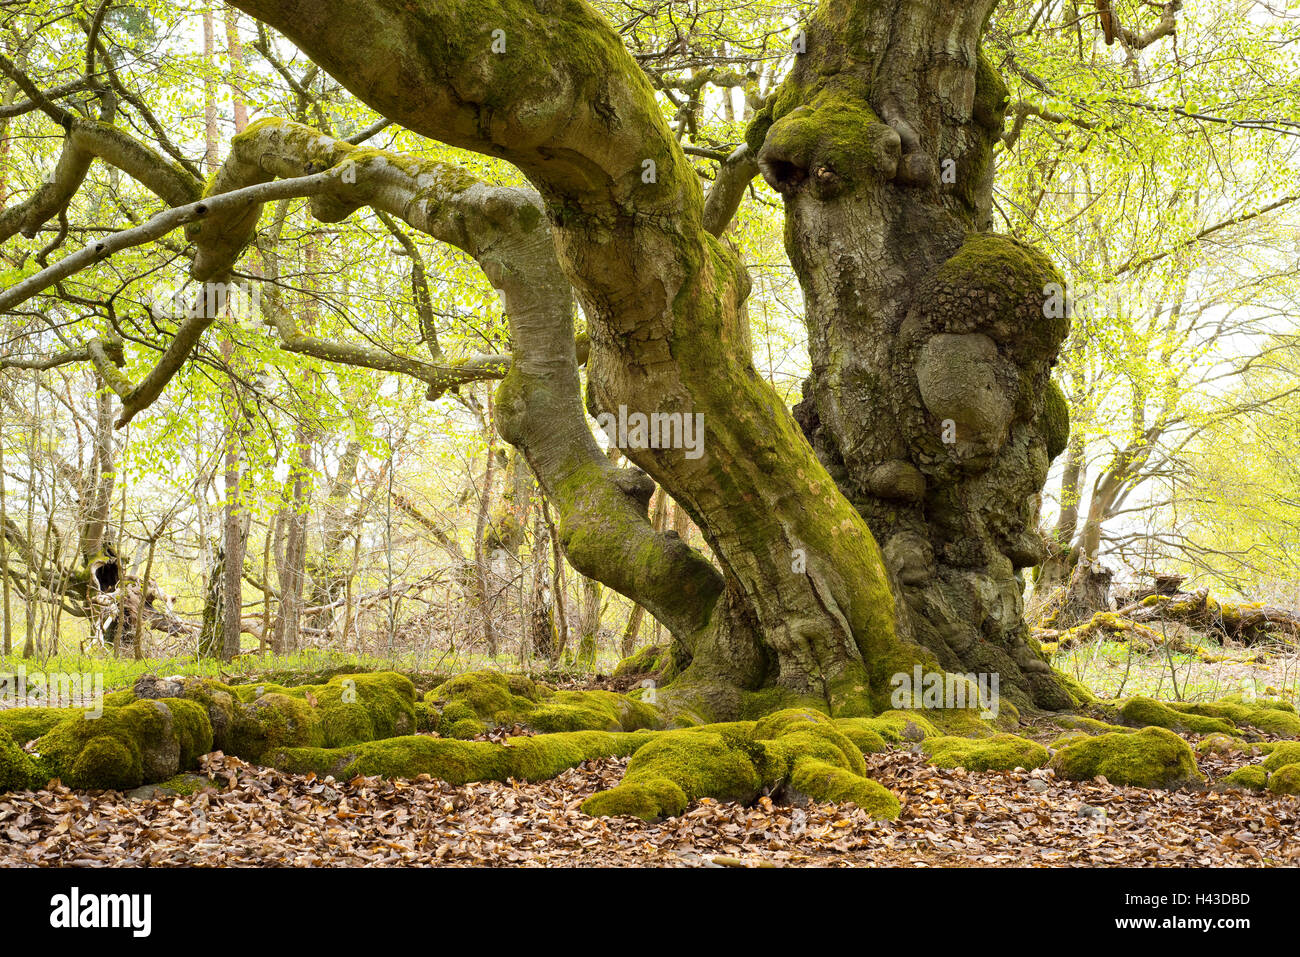 Old beeches (Fagus sylvatica) with mossy roots, Hutebuchen, Hutewald Halloh, Hesse, Germany Stock Photo